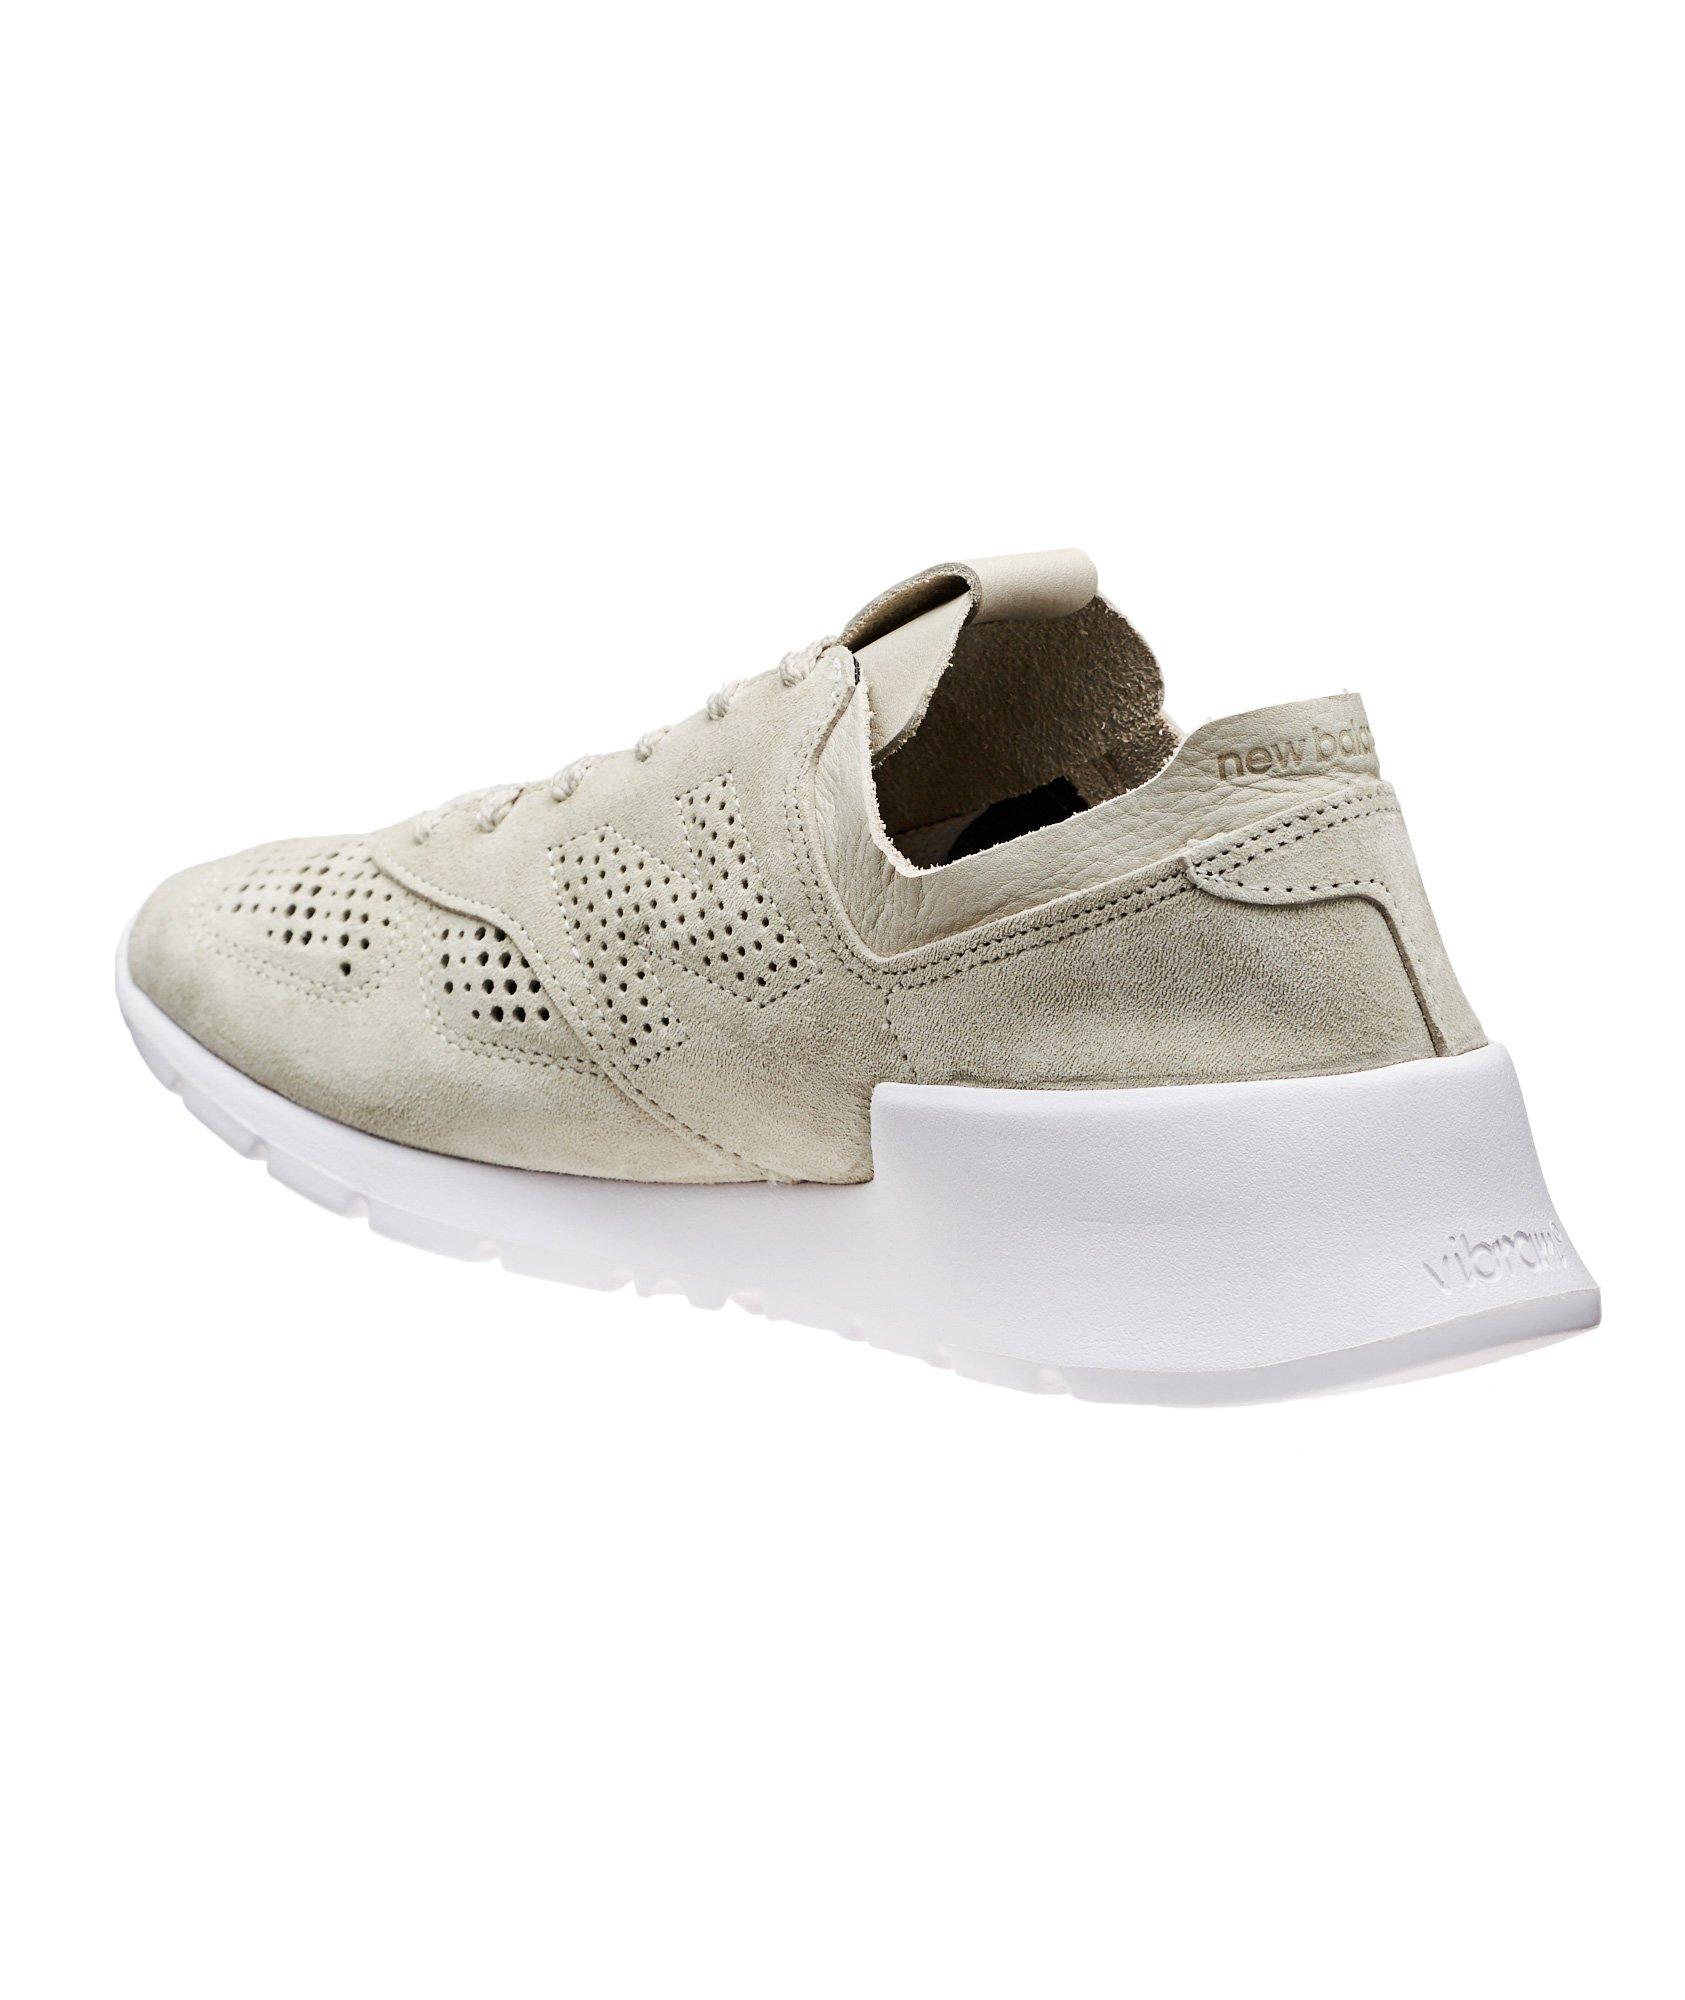 Perforated Leather Low-Tops image 1